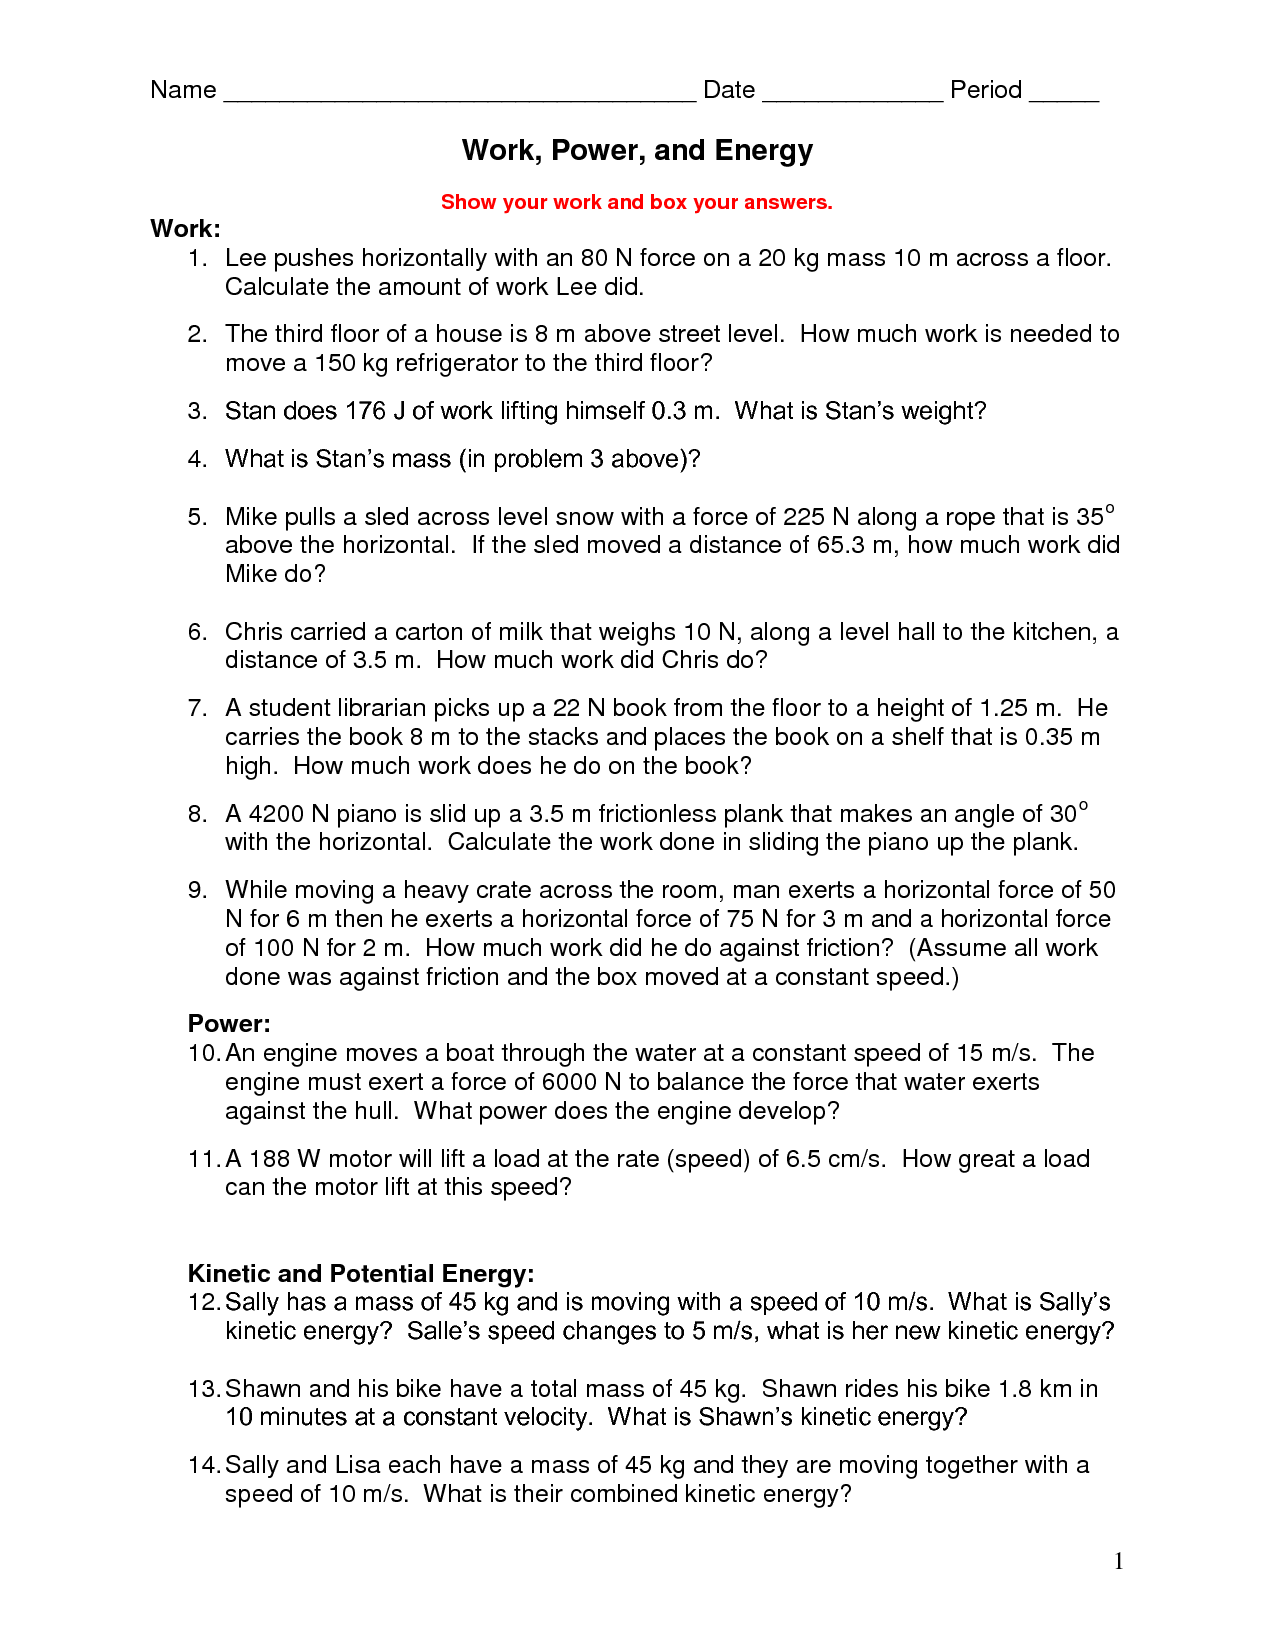 10-best-images-of-work-energy-and-power-worksheet-different-forms-of-energy-worksheets-work